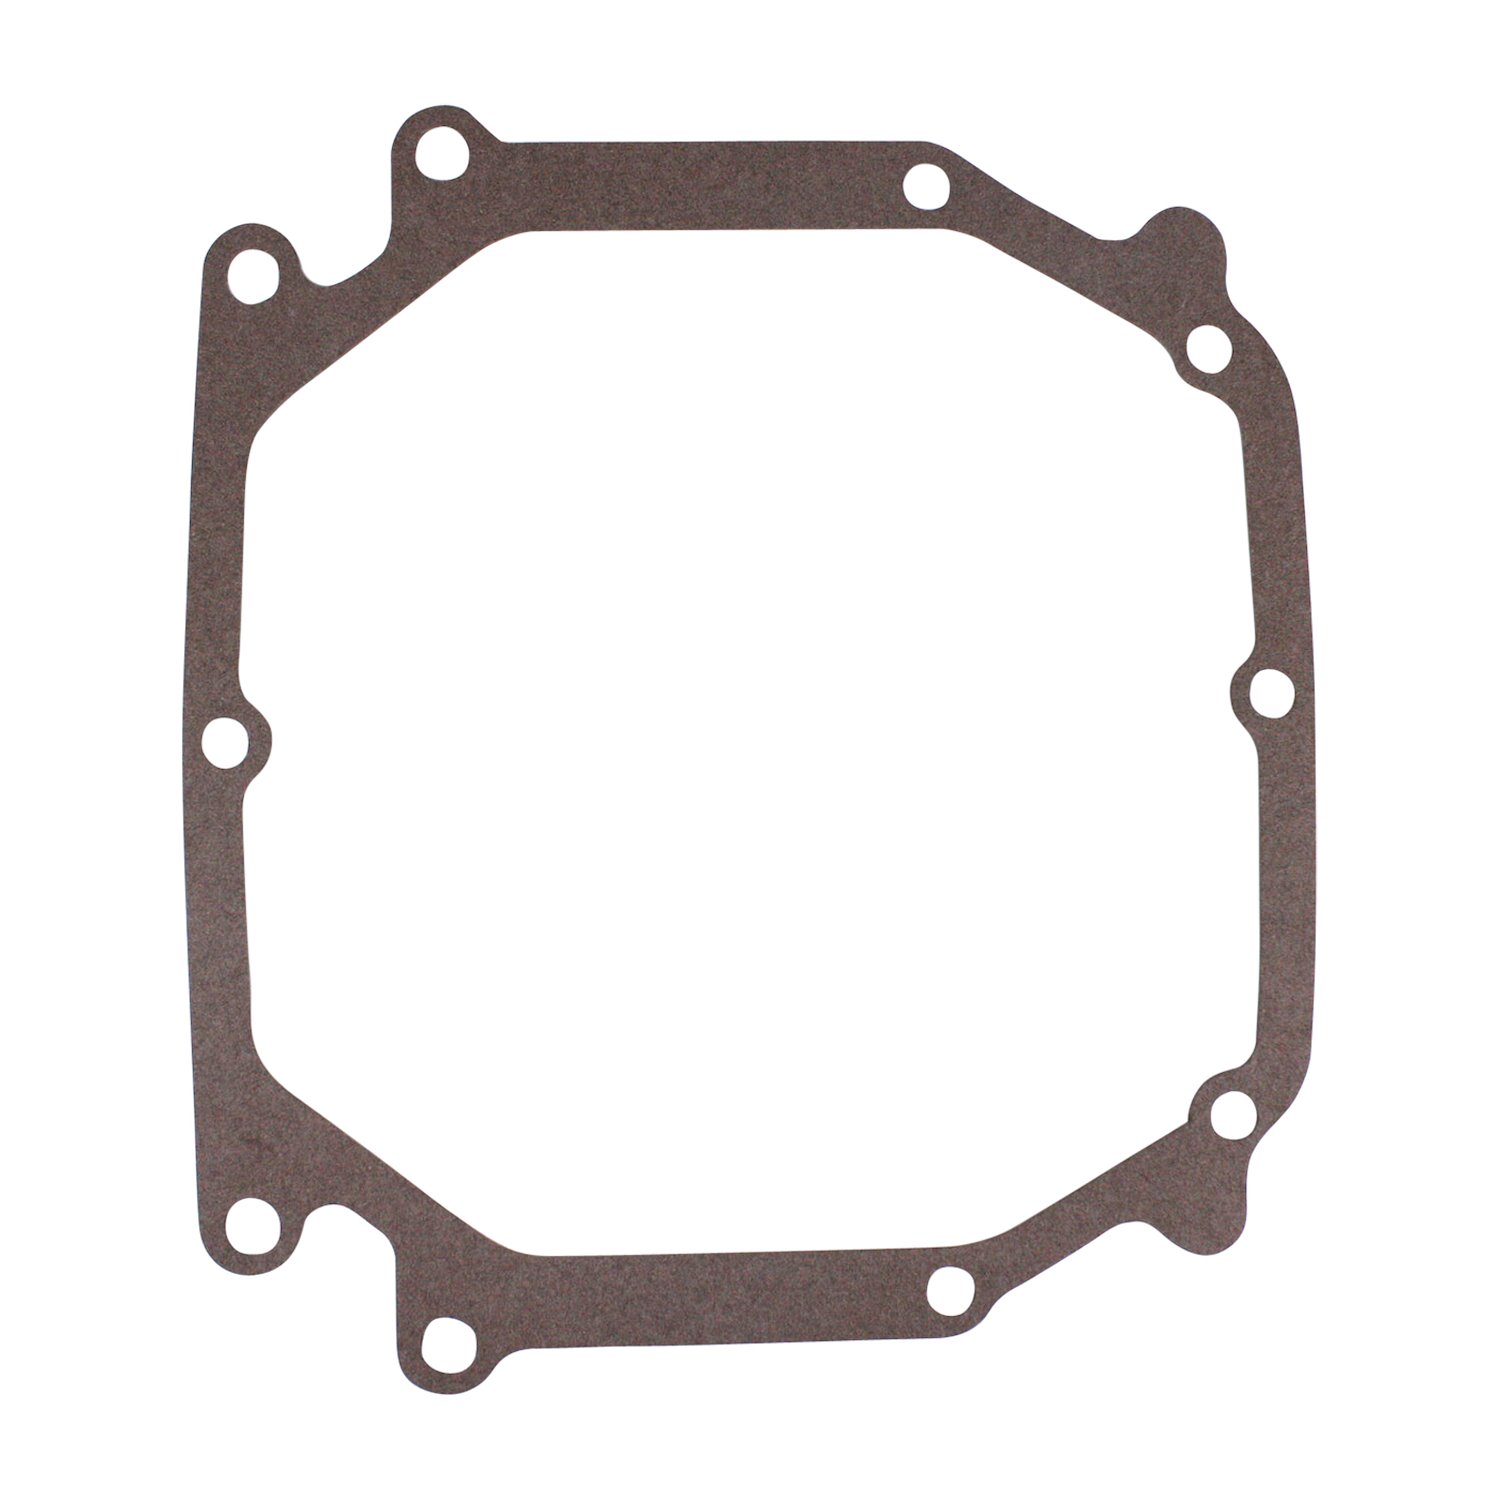 Replacement Cover Gasket For D36 Ica & Dana